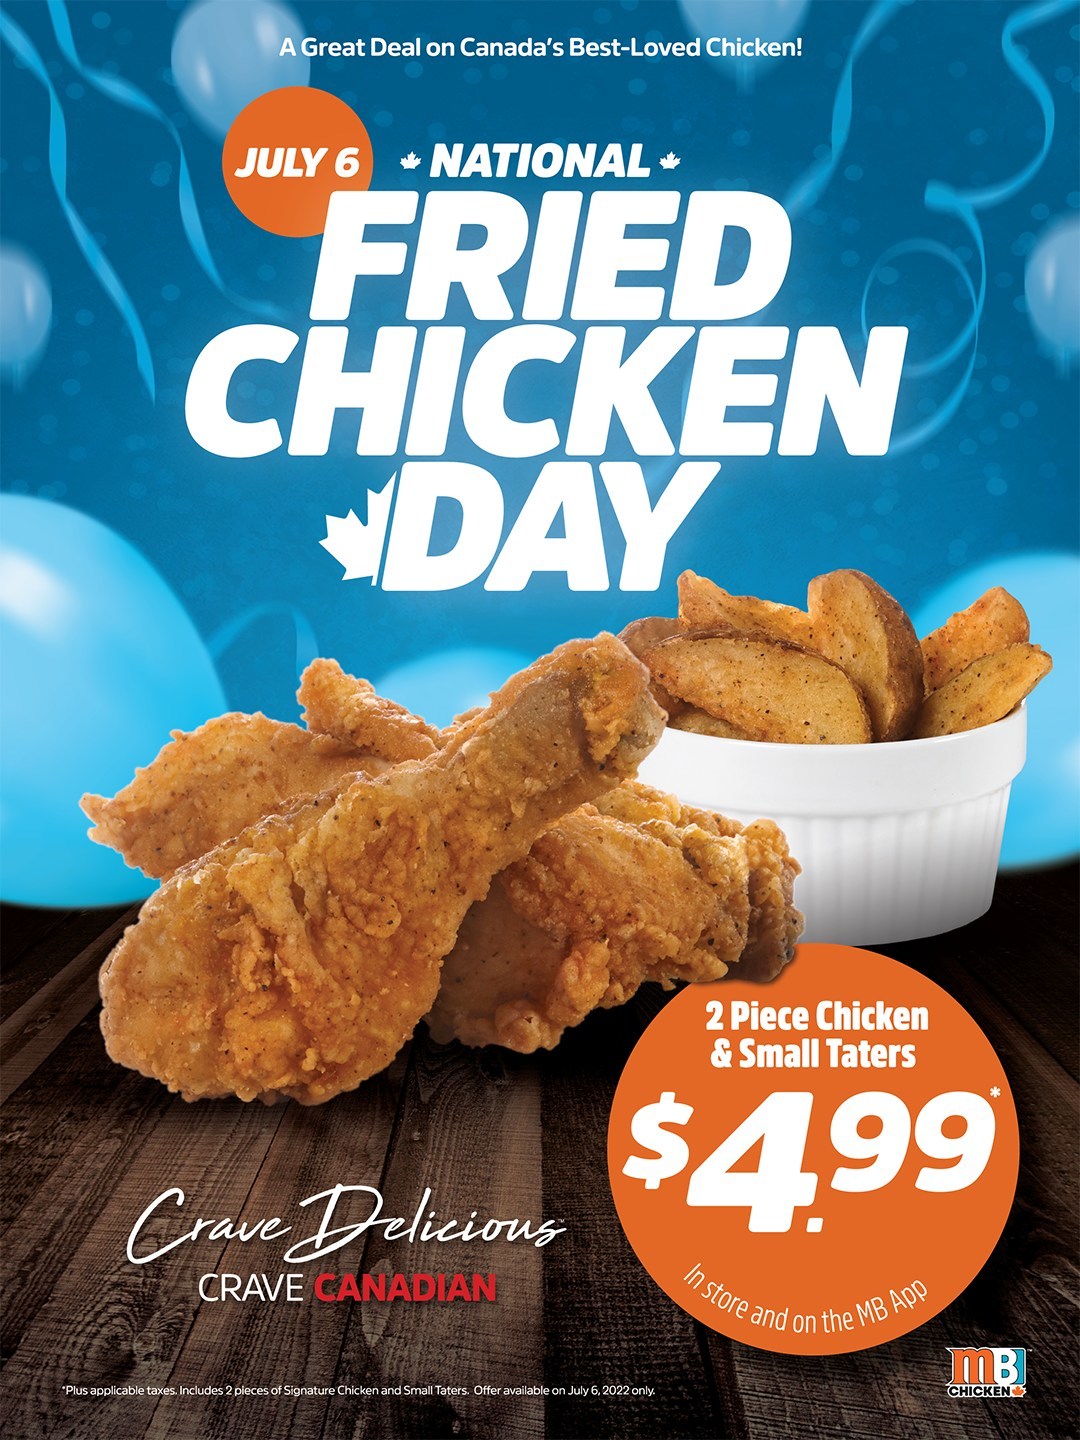 Mary Brown's Chicken 2022 National Fried Chicken Day Deals and Contest